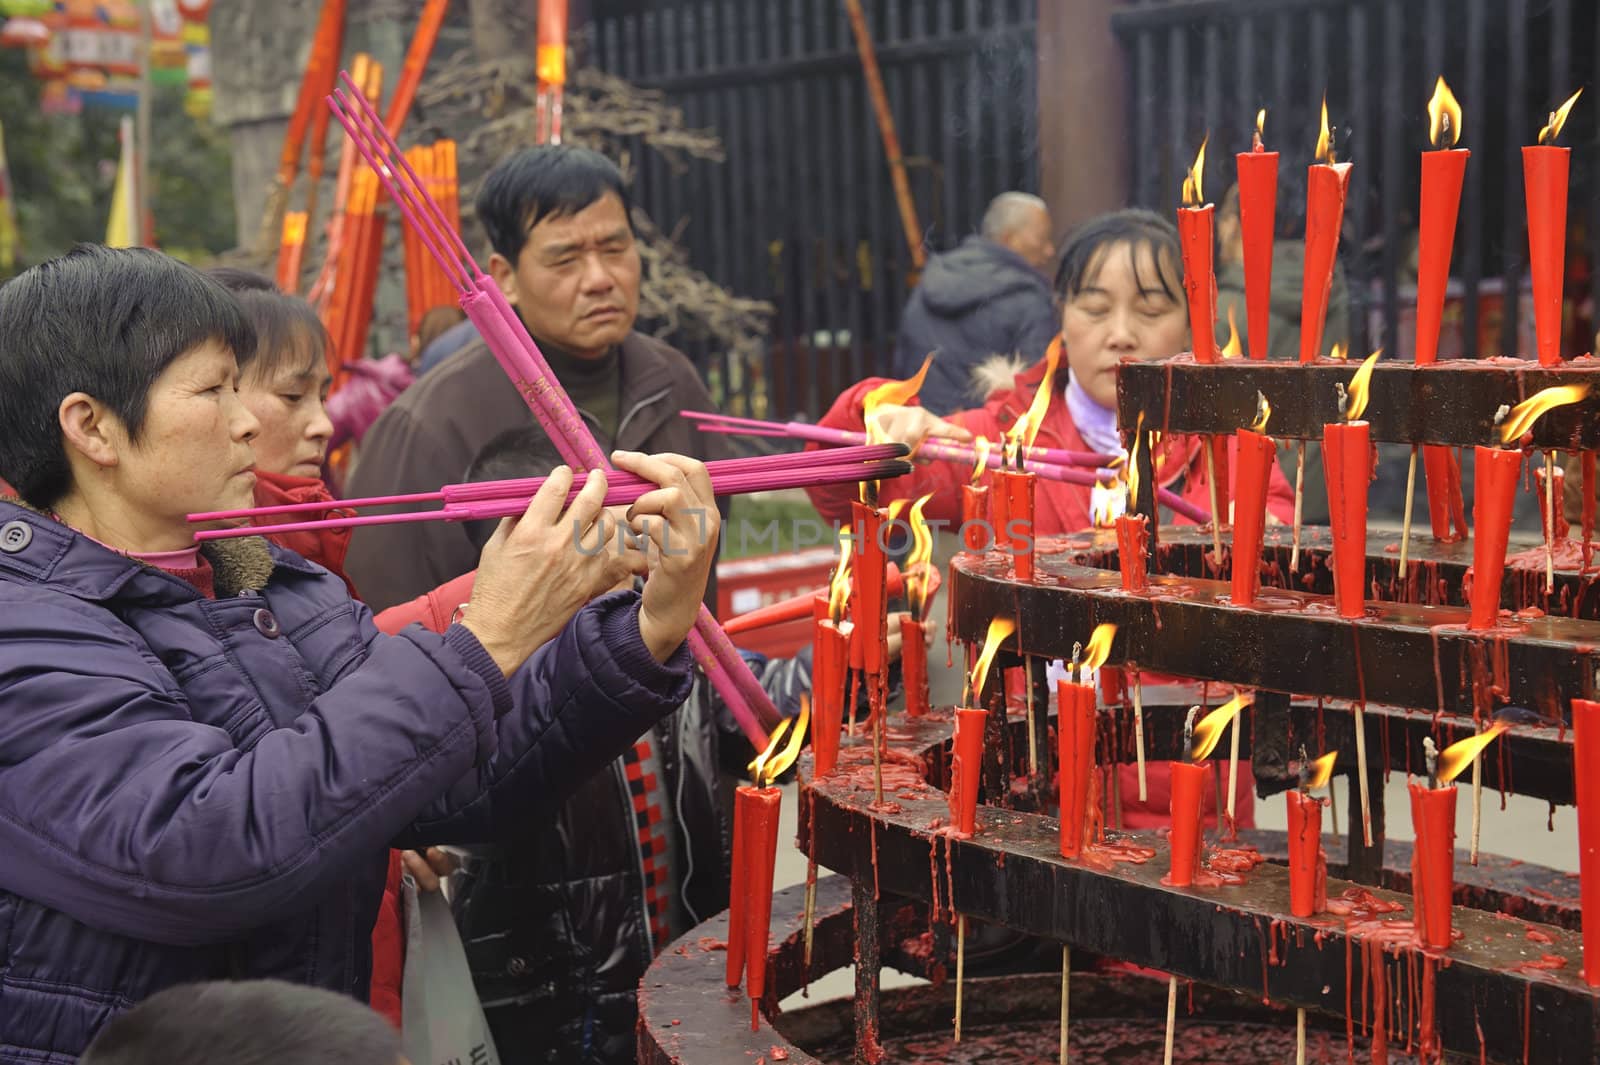 People burning incense upon the incense altar in temple by jackq